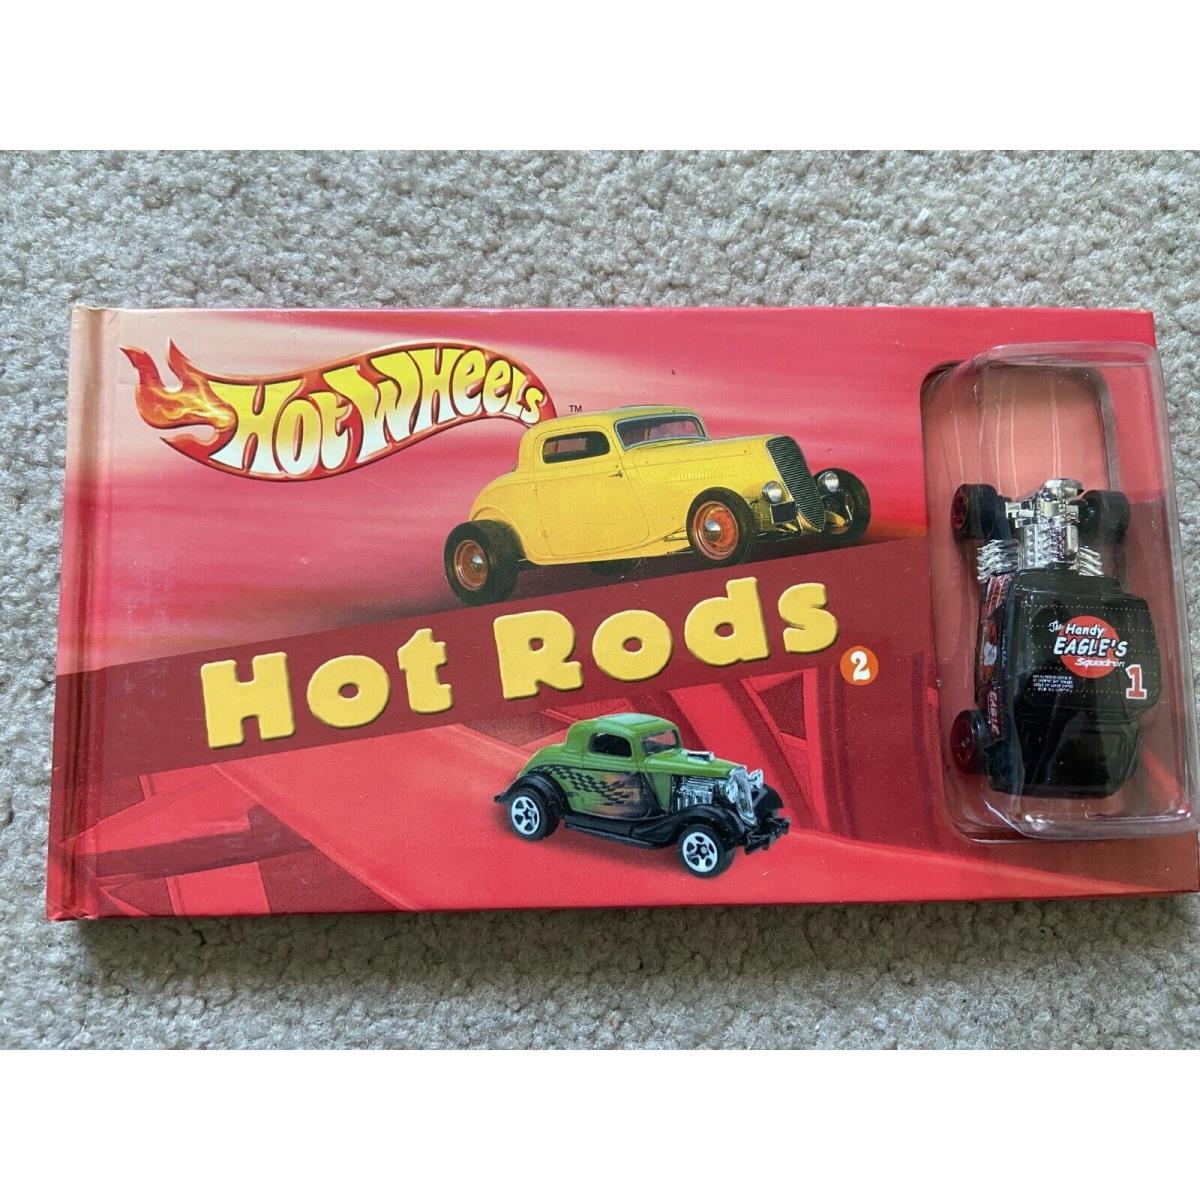 Hot Wheels Hot Rods Book and Car - Plastic Blister